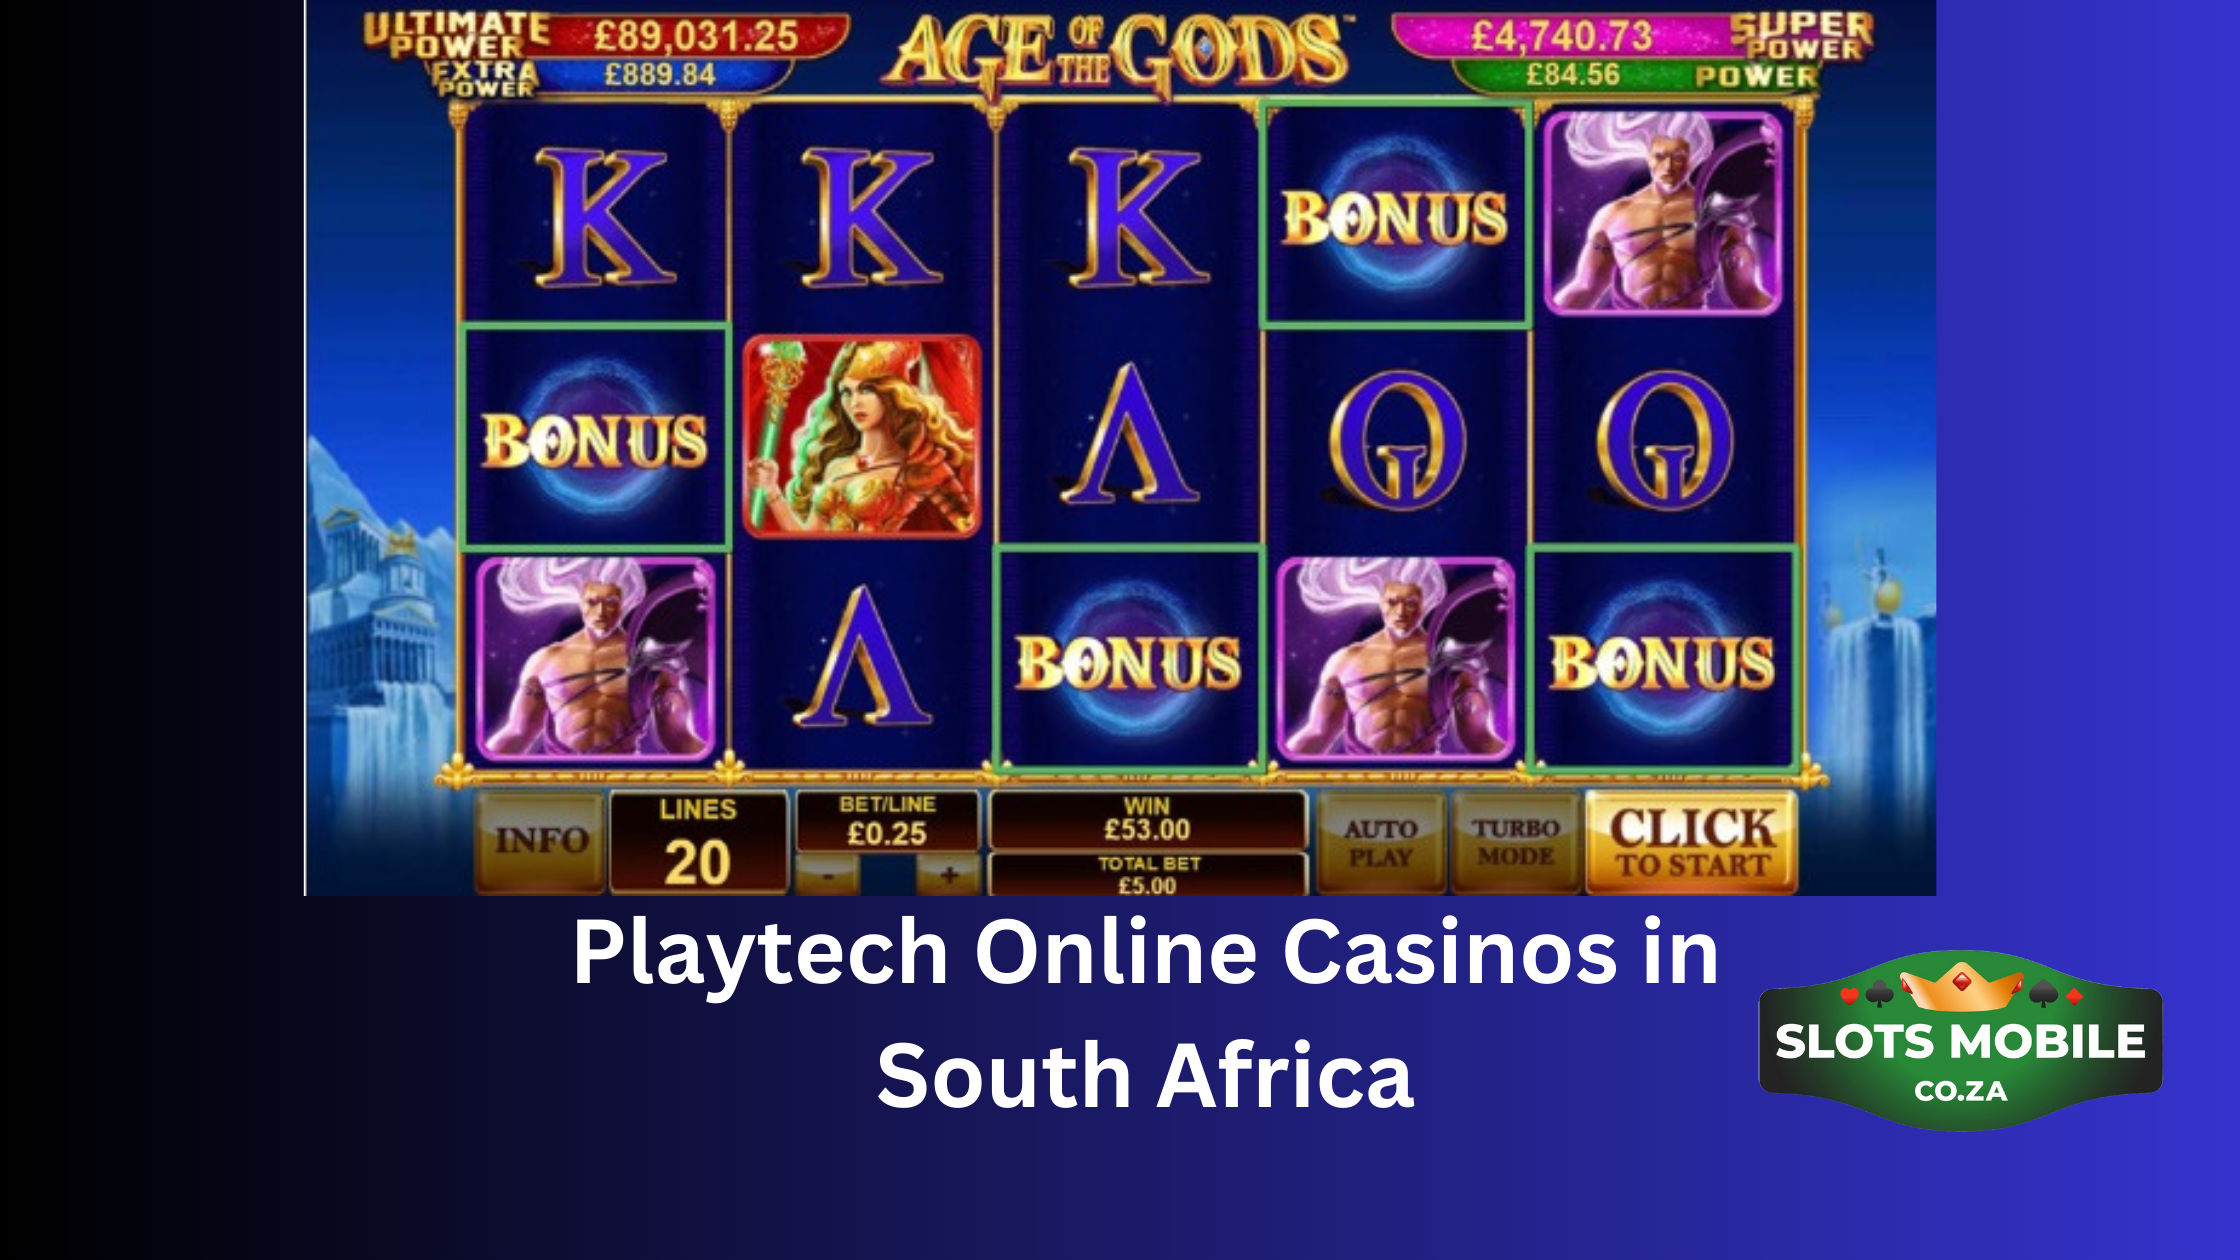 Playtech Online Casinos in South Africa